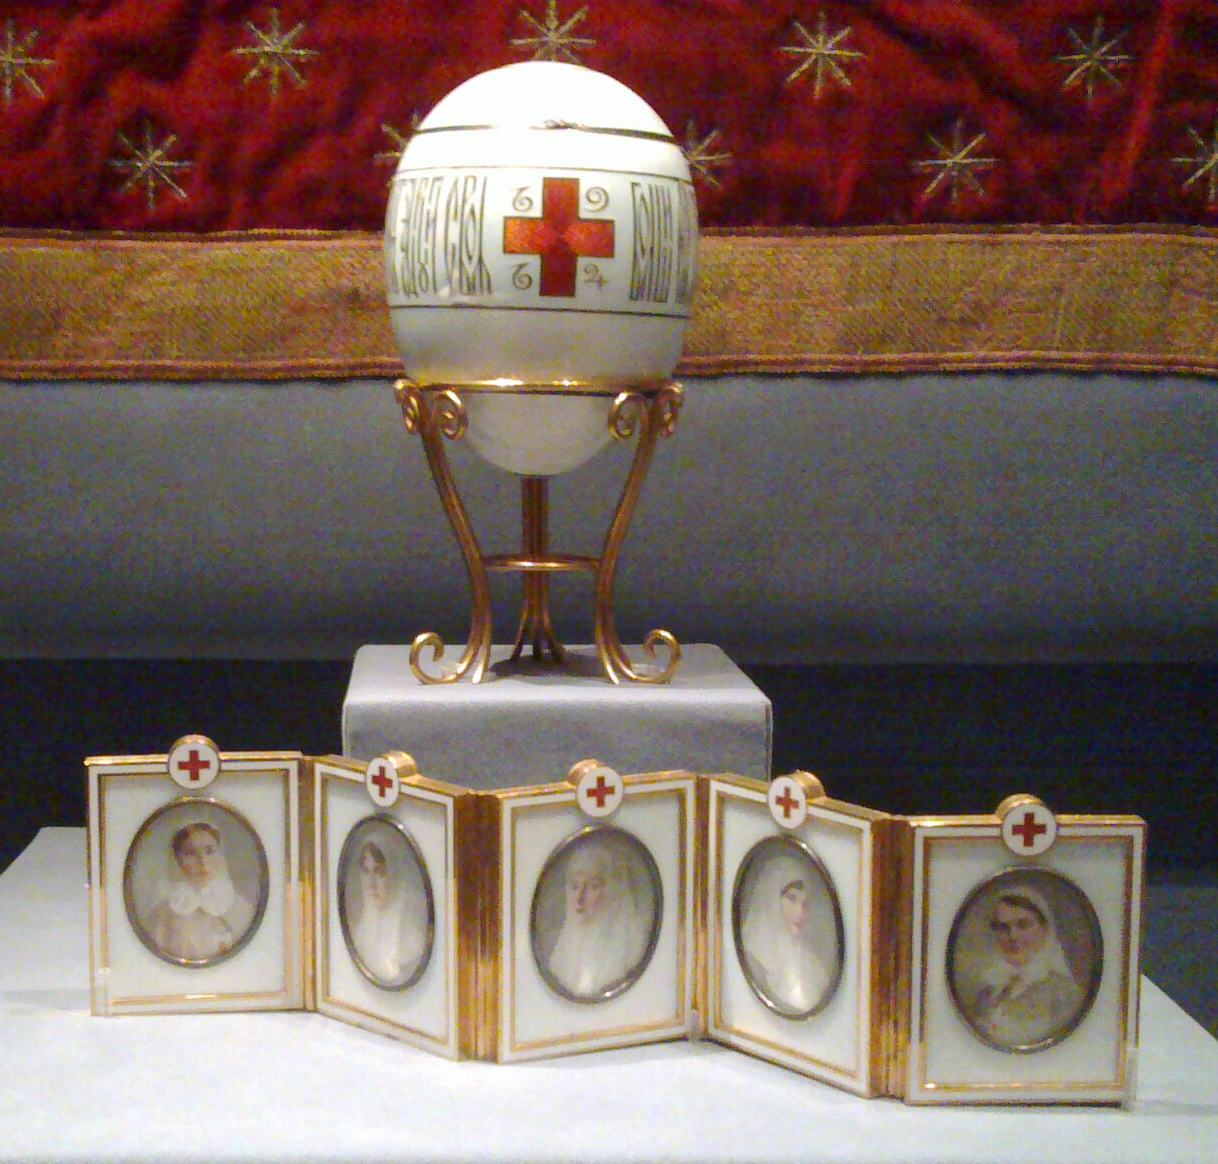 Red_Cross_with_Imperial_Portraits_(Fabergé_egg).jpg (1218×1164)